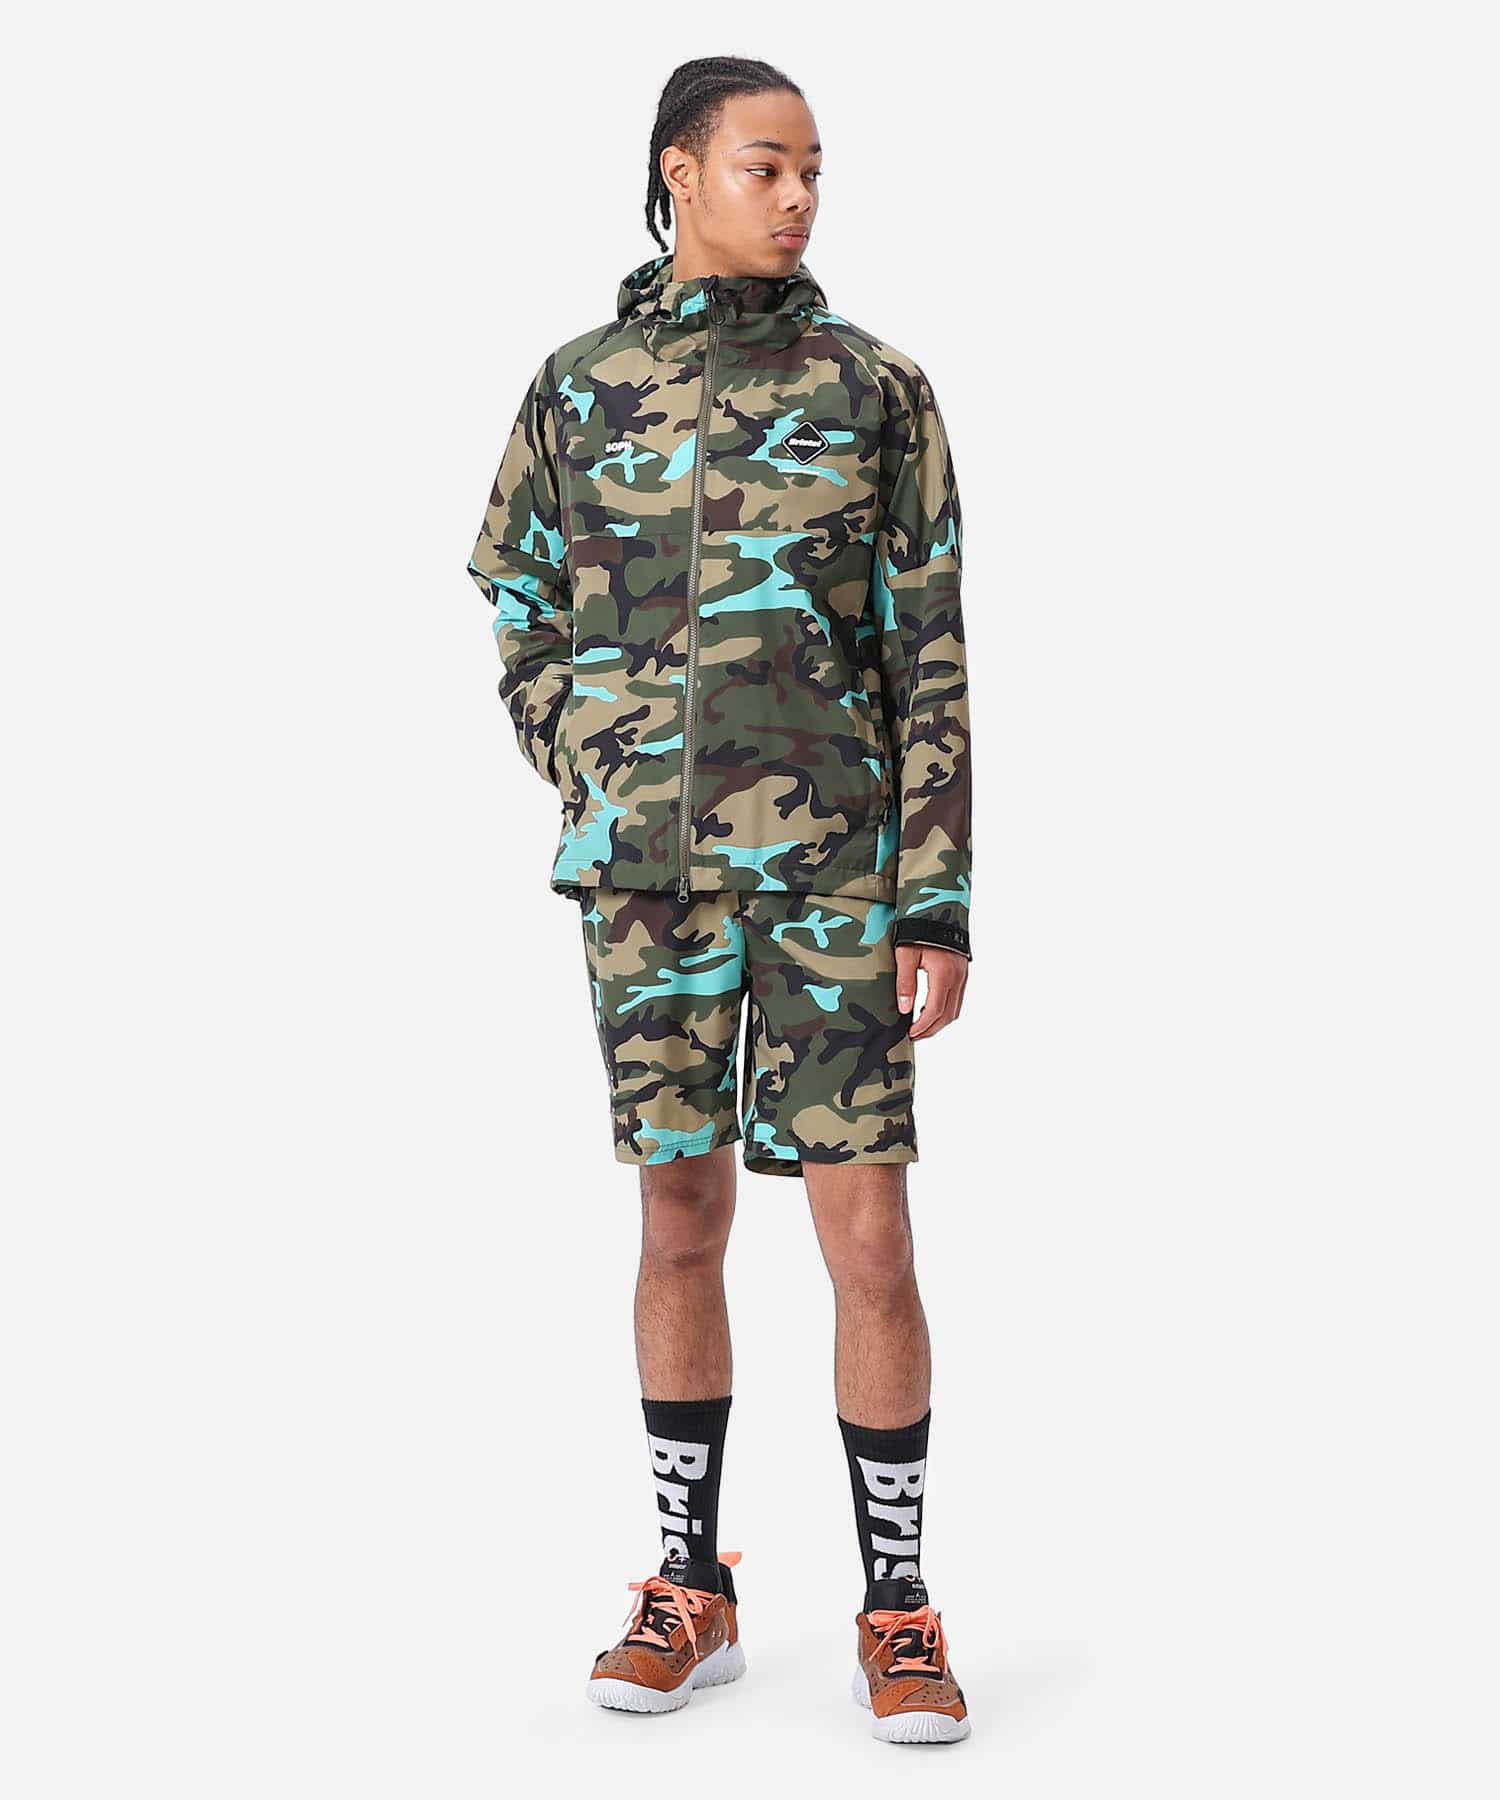 FCRB CAMOUFLAGE TEAM JACKET L